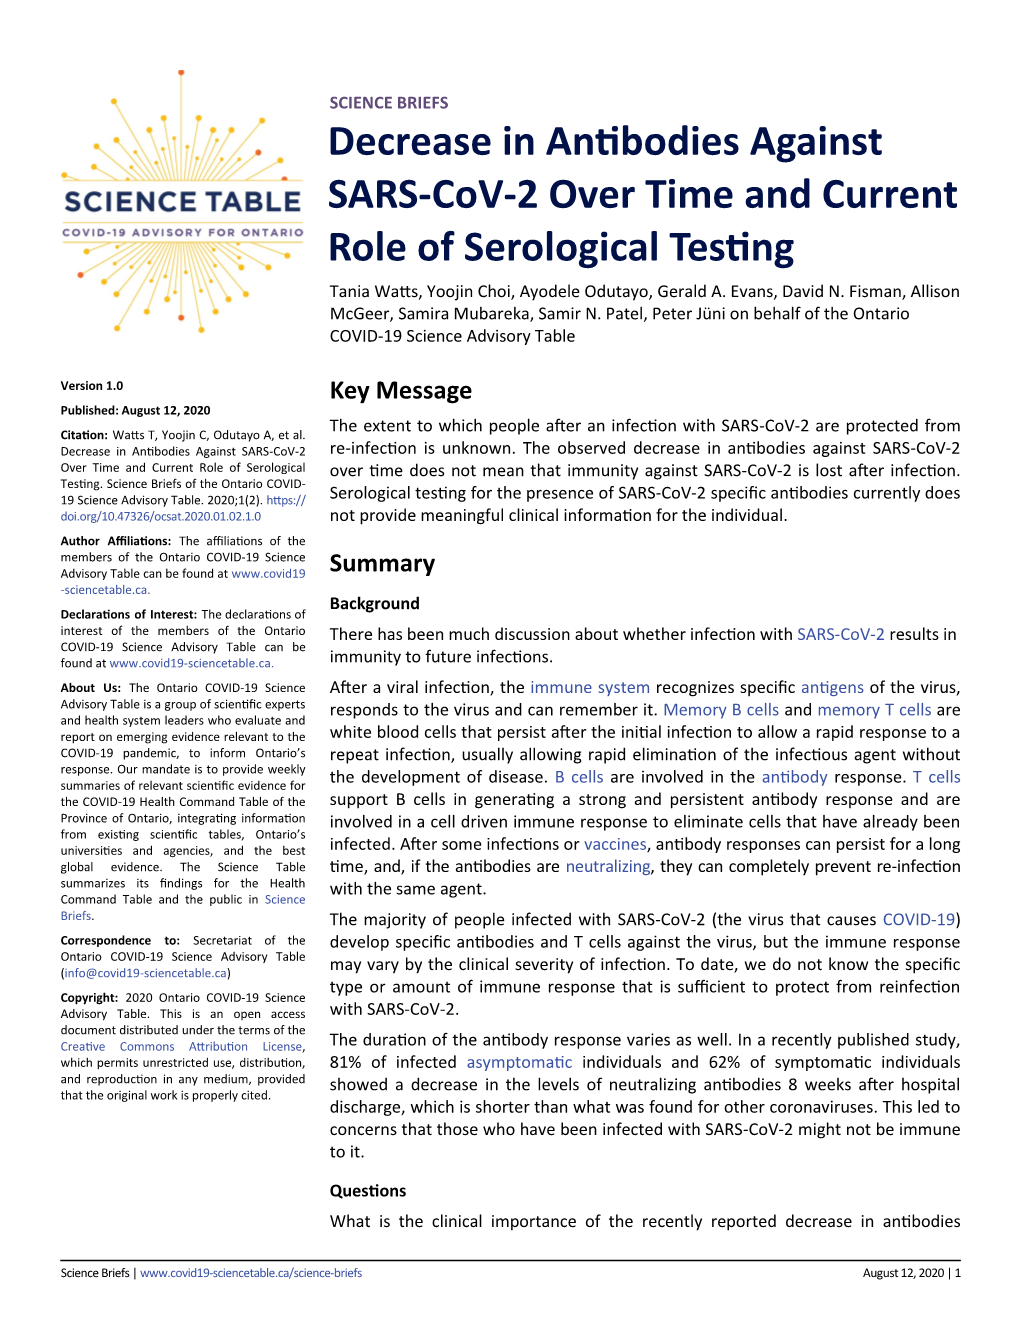 Decrease in Antibodies Against SARS-Cov-2 Over Time and Current Role of Serological Testing Tania Watts, Yoojin Choi, Ayodele Odutayo, Gerald A